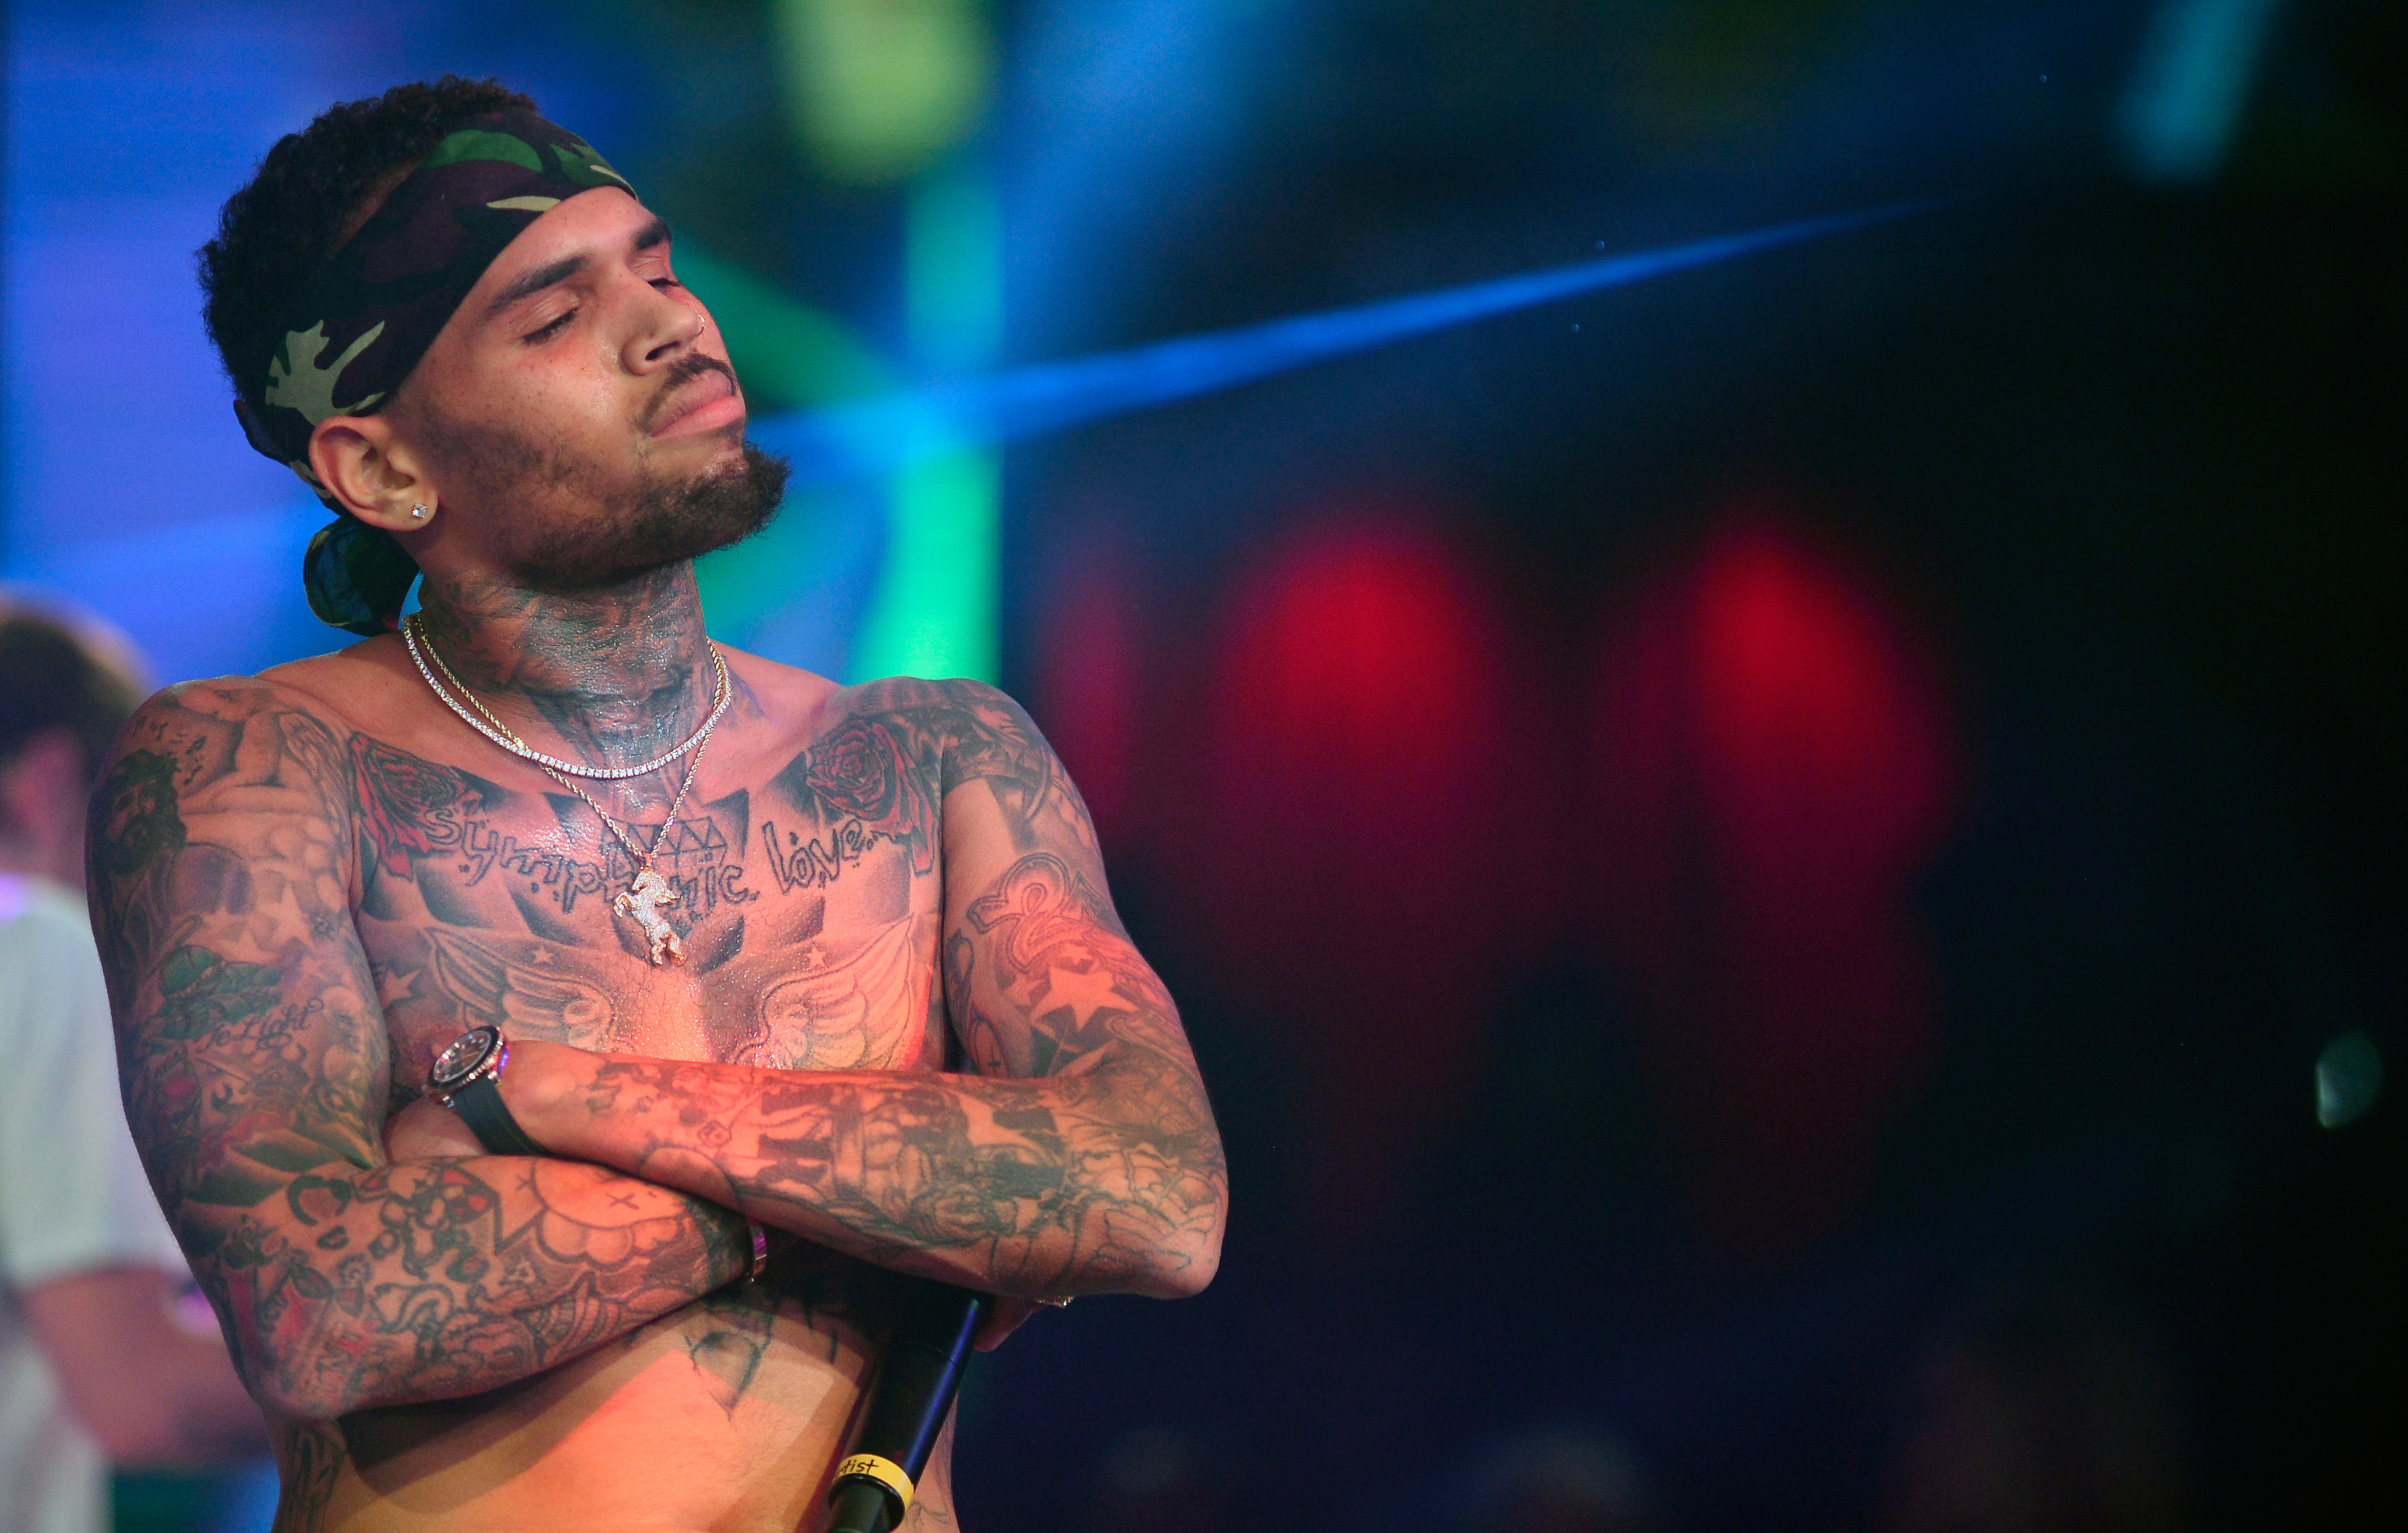 Chris Brown Refuses To Stand For National Anthem At